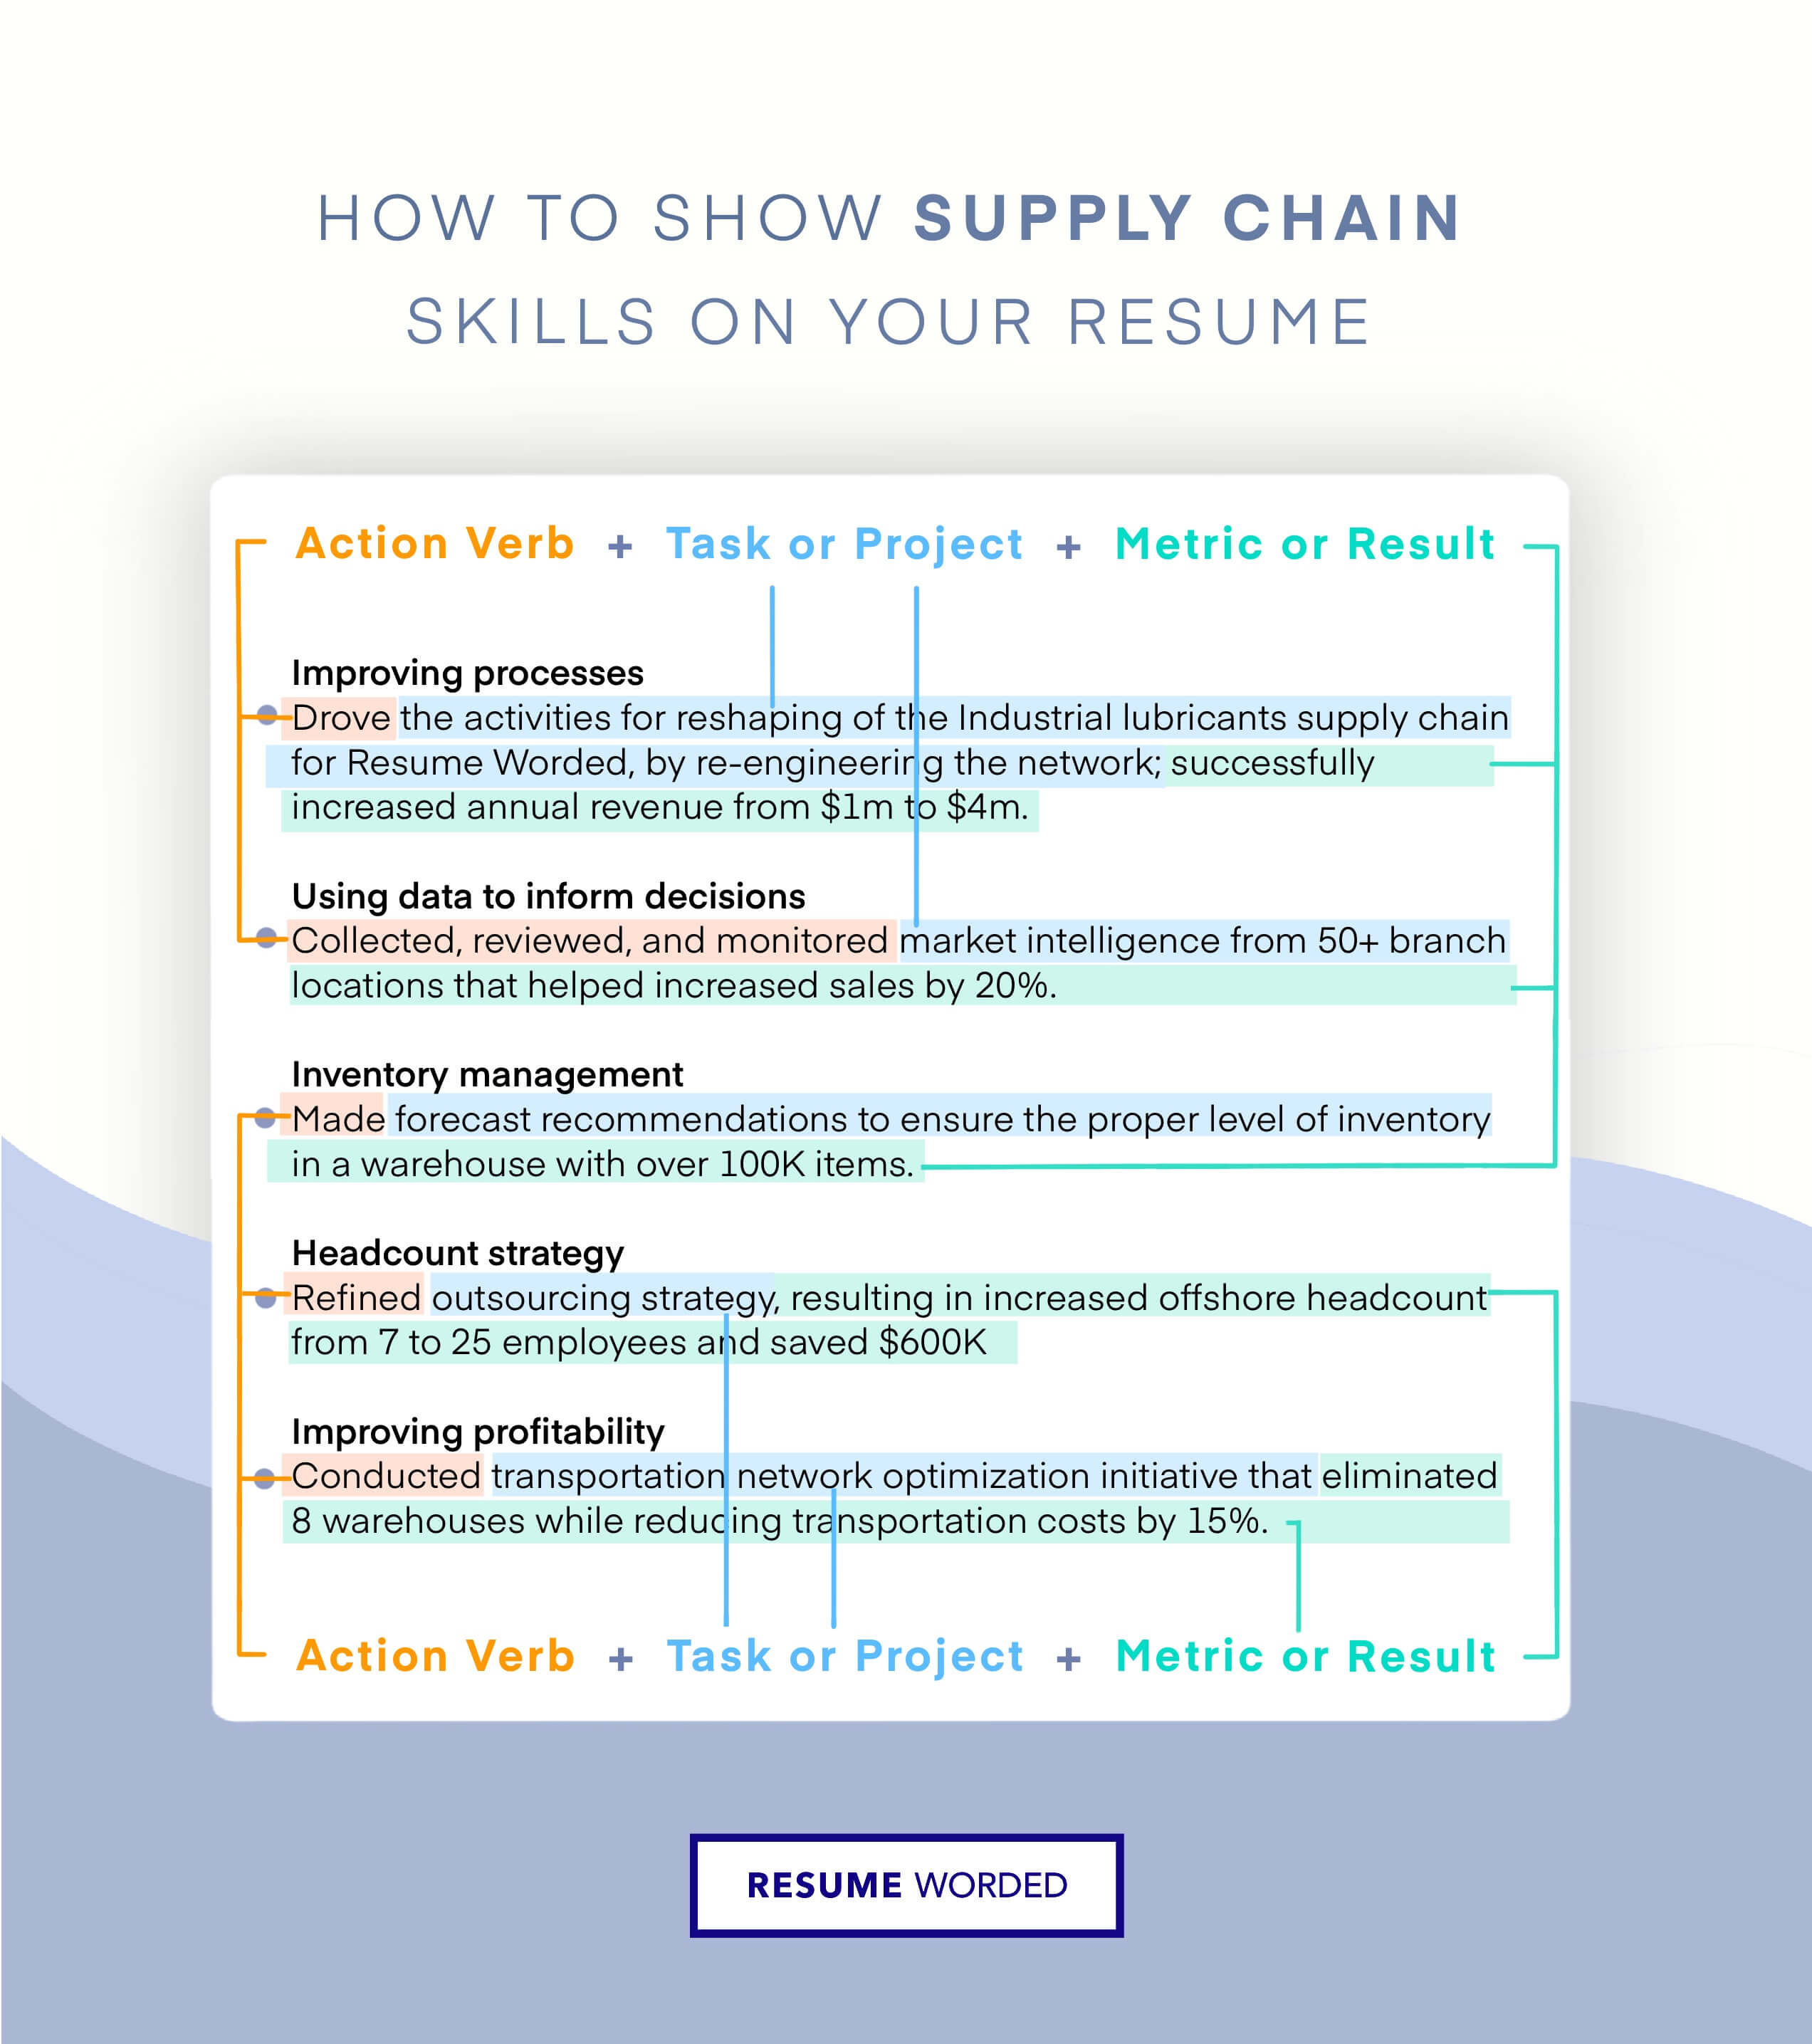 Showcase your knowledge of supply chain regulatory compliance on your resume. - Supply Chain Manager Resume